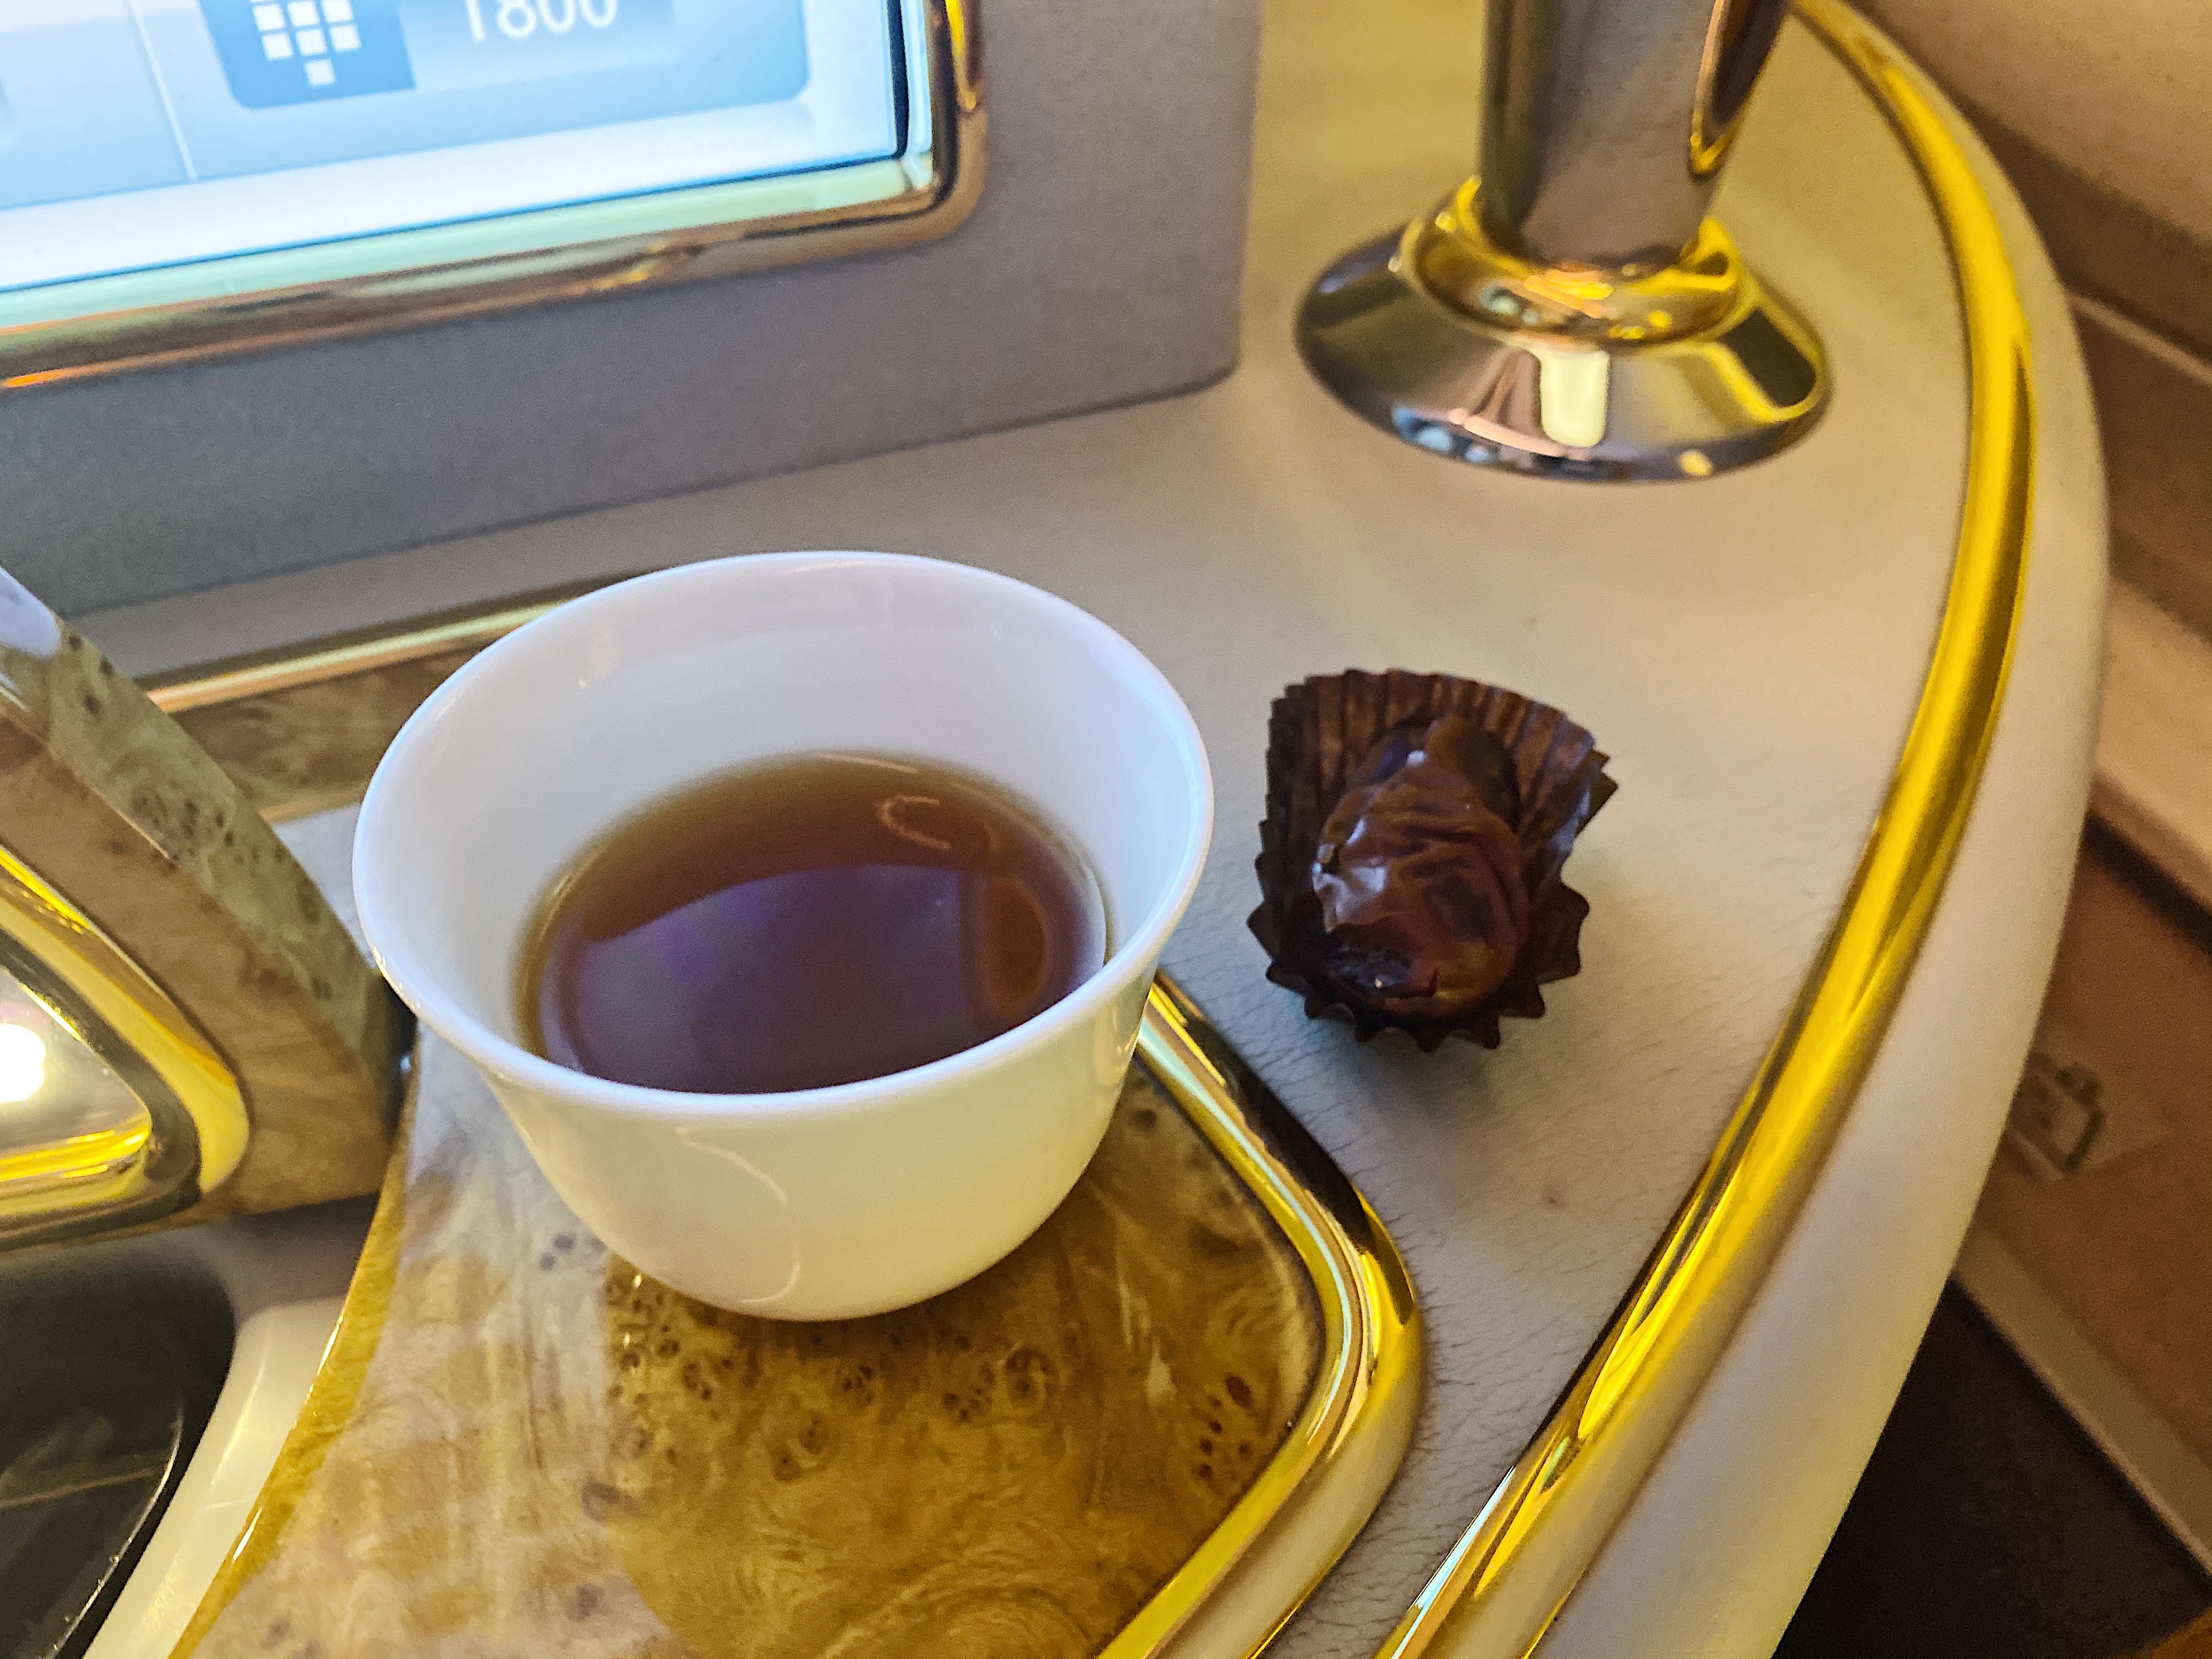 a cup of tea and chocolate on a tray